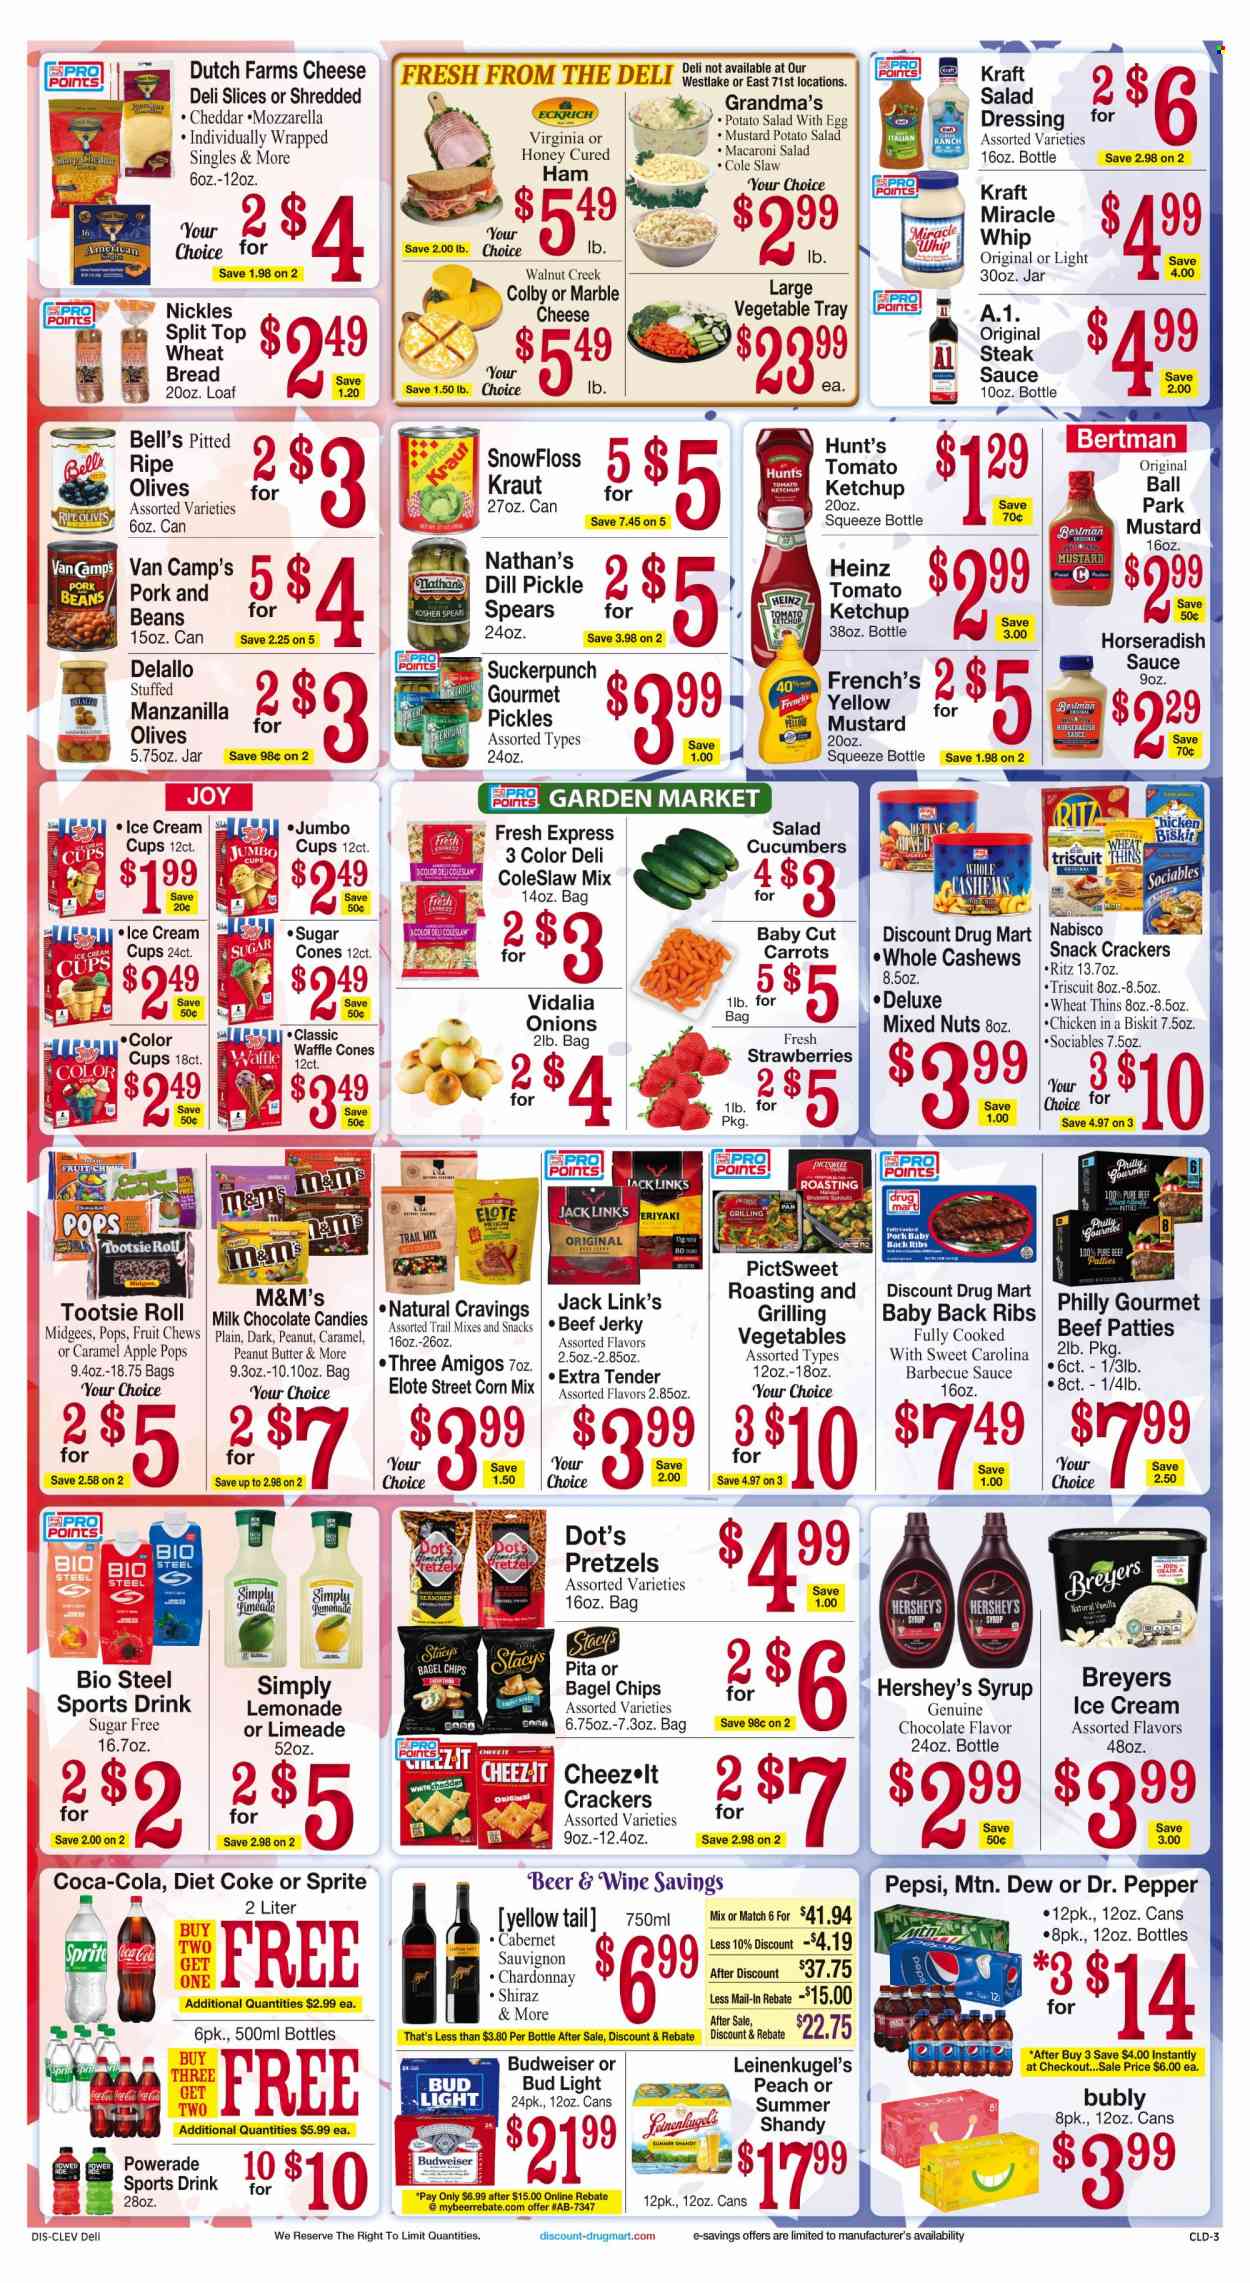 thumbnail - Discount Drug Mart Flyer - 05/24/2023 - 05/30/2023 - Sales products - bagels, wheat bread, pretzels, beans, carrots, cucumber, garlic, horseradish, onion, salad, brussel sprouts, coleslaw, sauce, Kraft®, beef jerky, ham, jerky, potato salad, macaroni salad, Colby cheese, mozzarella, cheese, Provolone, Miracle Whip, ice cream, Hershey's, milk chocolate, M&M's, crackers, chewing gum, chocolate candies, RITZ, Nabisco, dill pickle, chips, Thins, Cheez-It, Jack Link's, Heinz, pickles, olives, dill, BBQ sauce, mustard, ketchup, dressing, peanut butter, syrup, cashews, mixed nuts, trail mix, Coca-Cola, lemonade, Mountain Dew, Sprite, Powerade, Pepsi, energy drink, Dr. Pepper, Diet Coke, soft drink, Coke, Cabernet Sauvignon, red wine, white wine, Chardonnay, wine, alcohol, Shiraz, beer, Bud Light, Bell's, chicken, steak, ribs, pork meat, pork ribs, pork back ribs, Joy, tray, pan, jar, Budweiser, Leinenkugel's. Page 3.